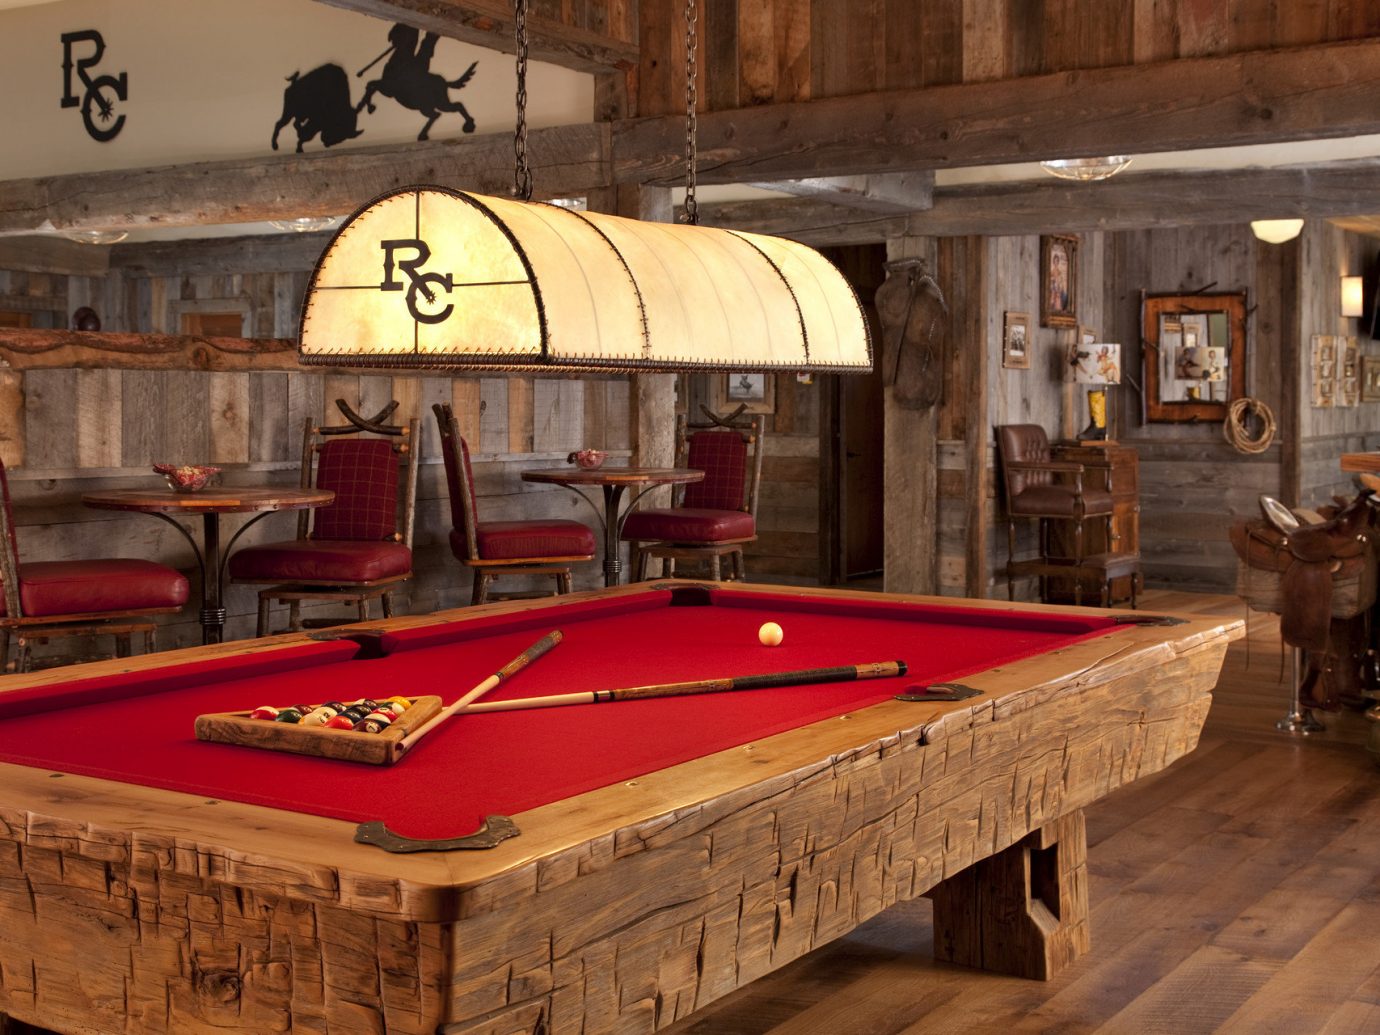 Glamping Hotels Montana Outdoors + Adventure Trip Ideas indoor billiard room recreation room floor room wooden billiard table furniture games wood estate table indoor games and sports cue sports